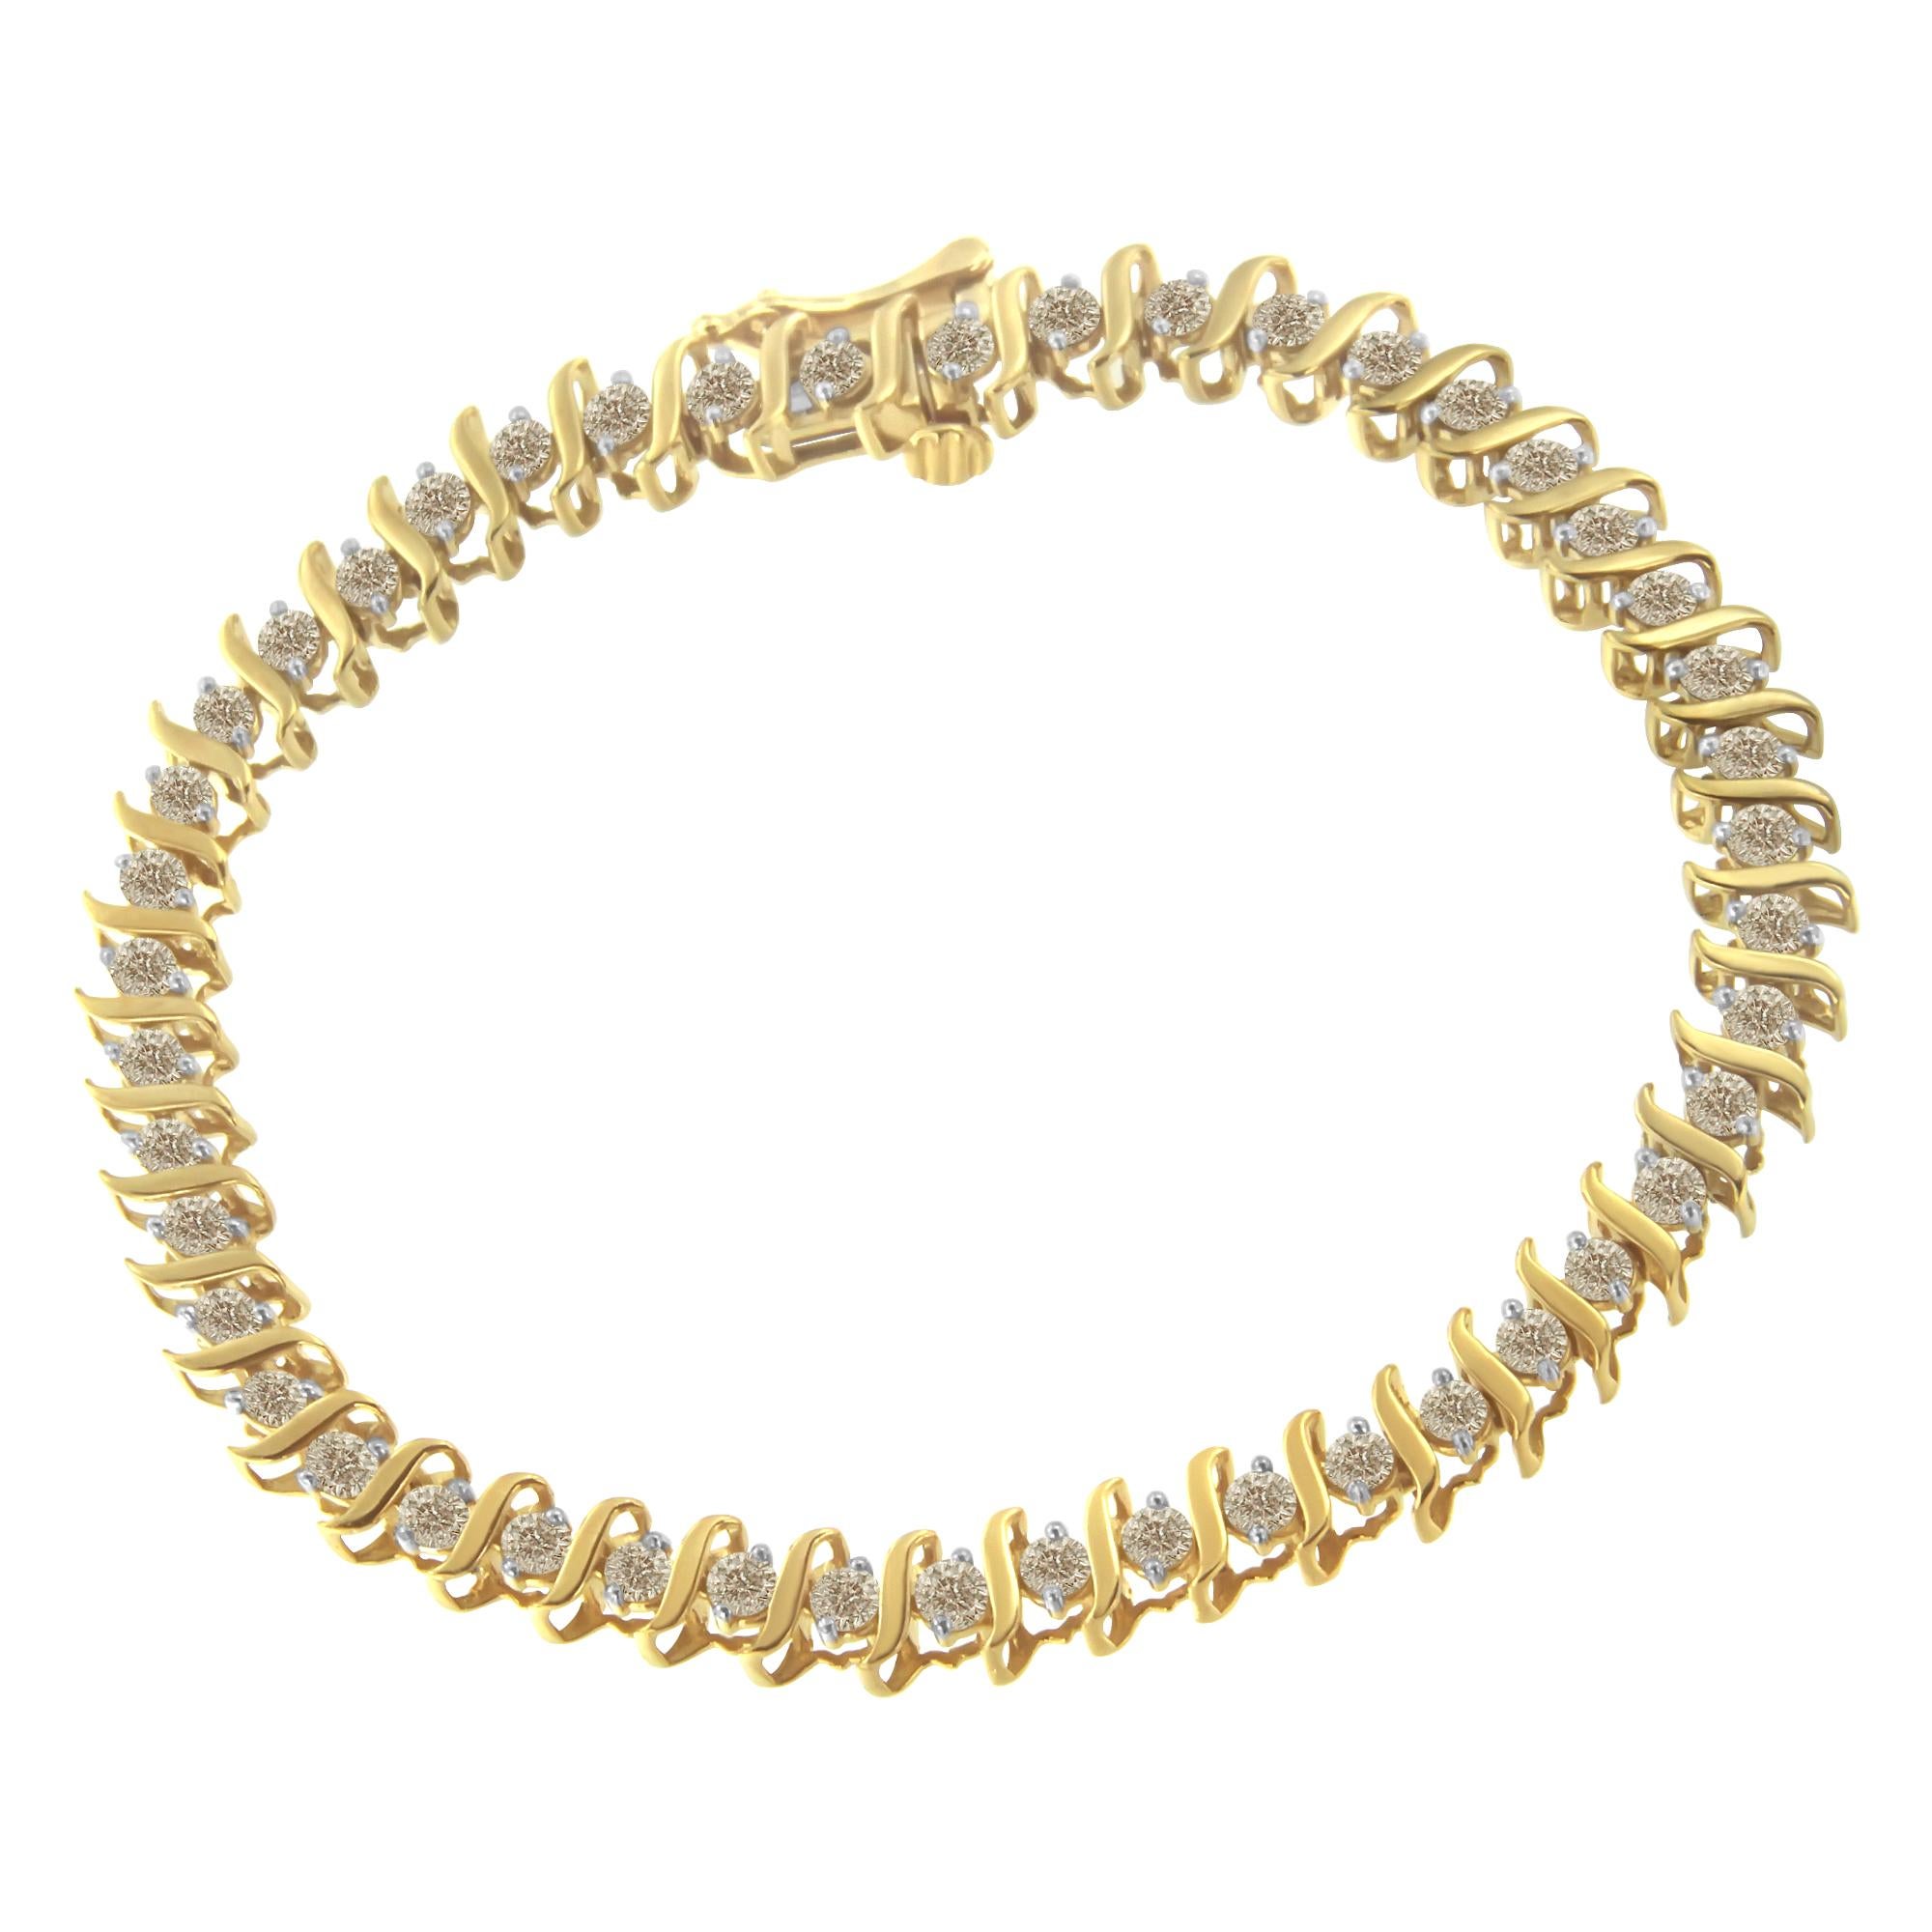 The jewelry piece is a bracelet composed of yellow gold with an S-link design. It is crafted of 10 karat yellow gold. And each of the diamond is embellished with alluring 3ct round-cut diamonds. Each link is curved to form an 